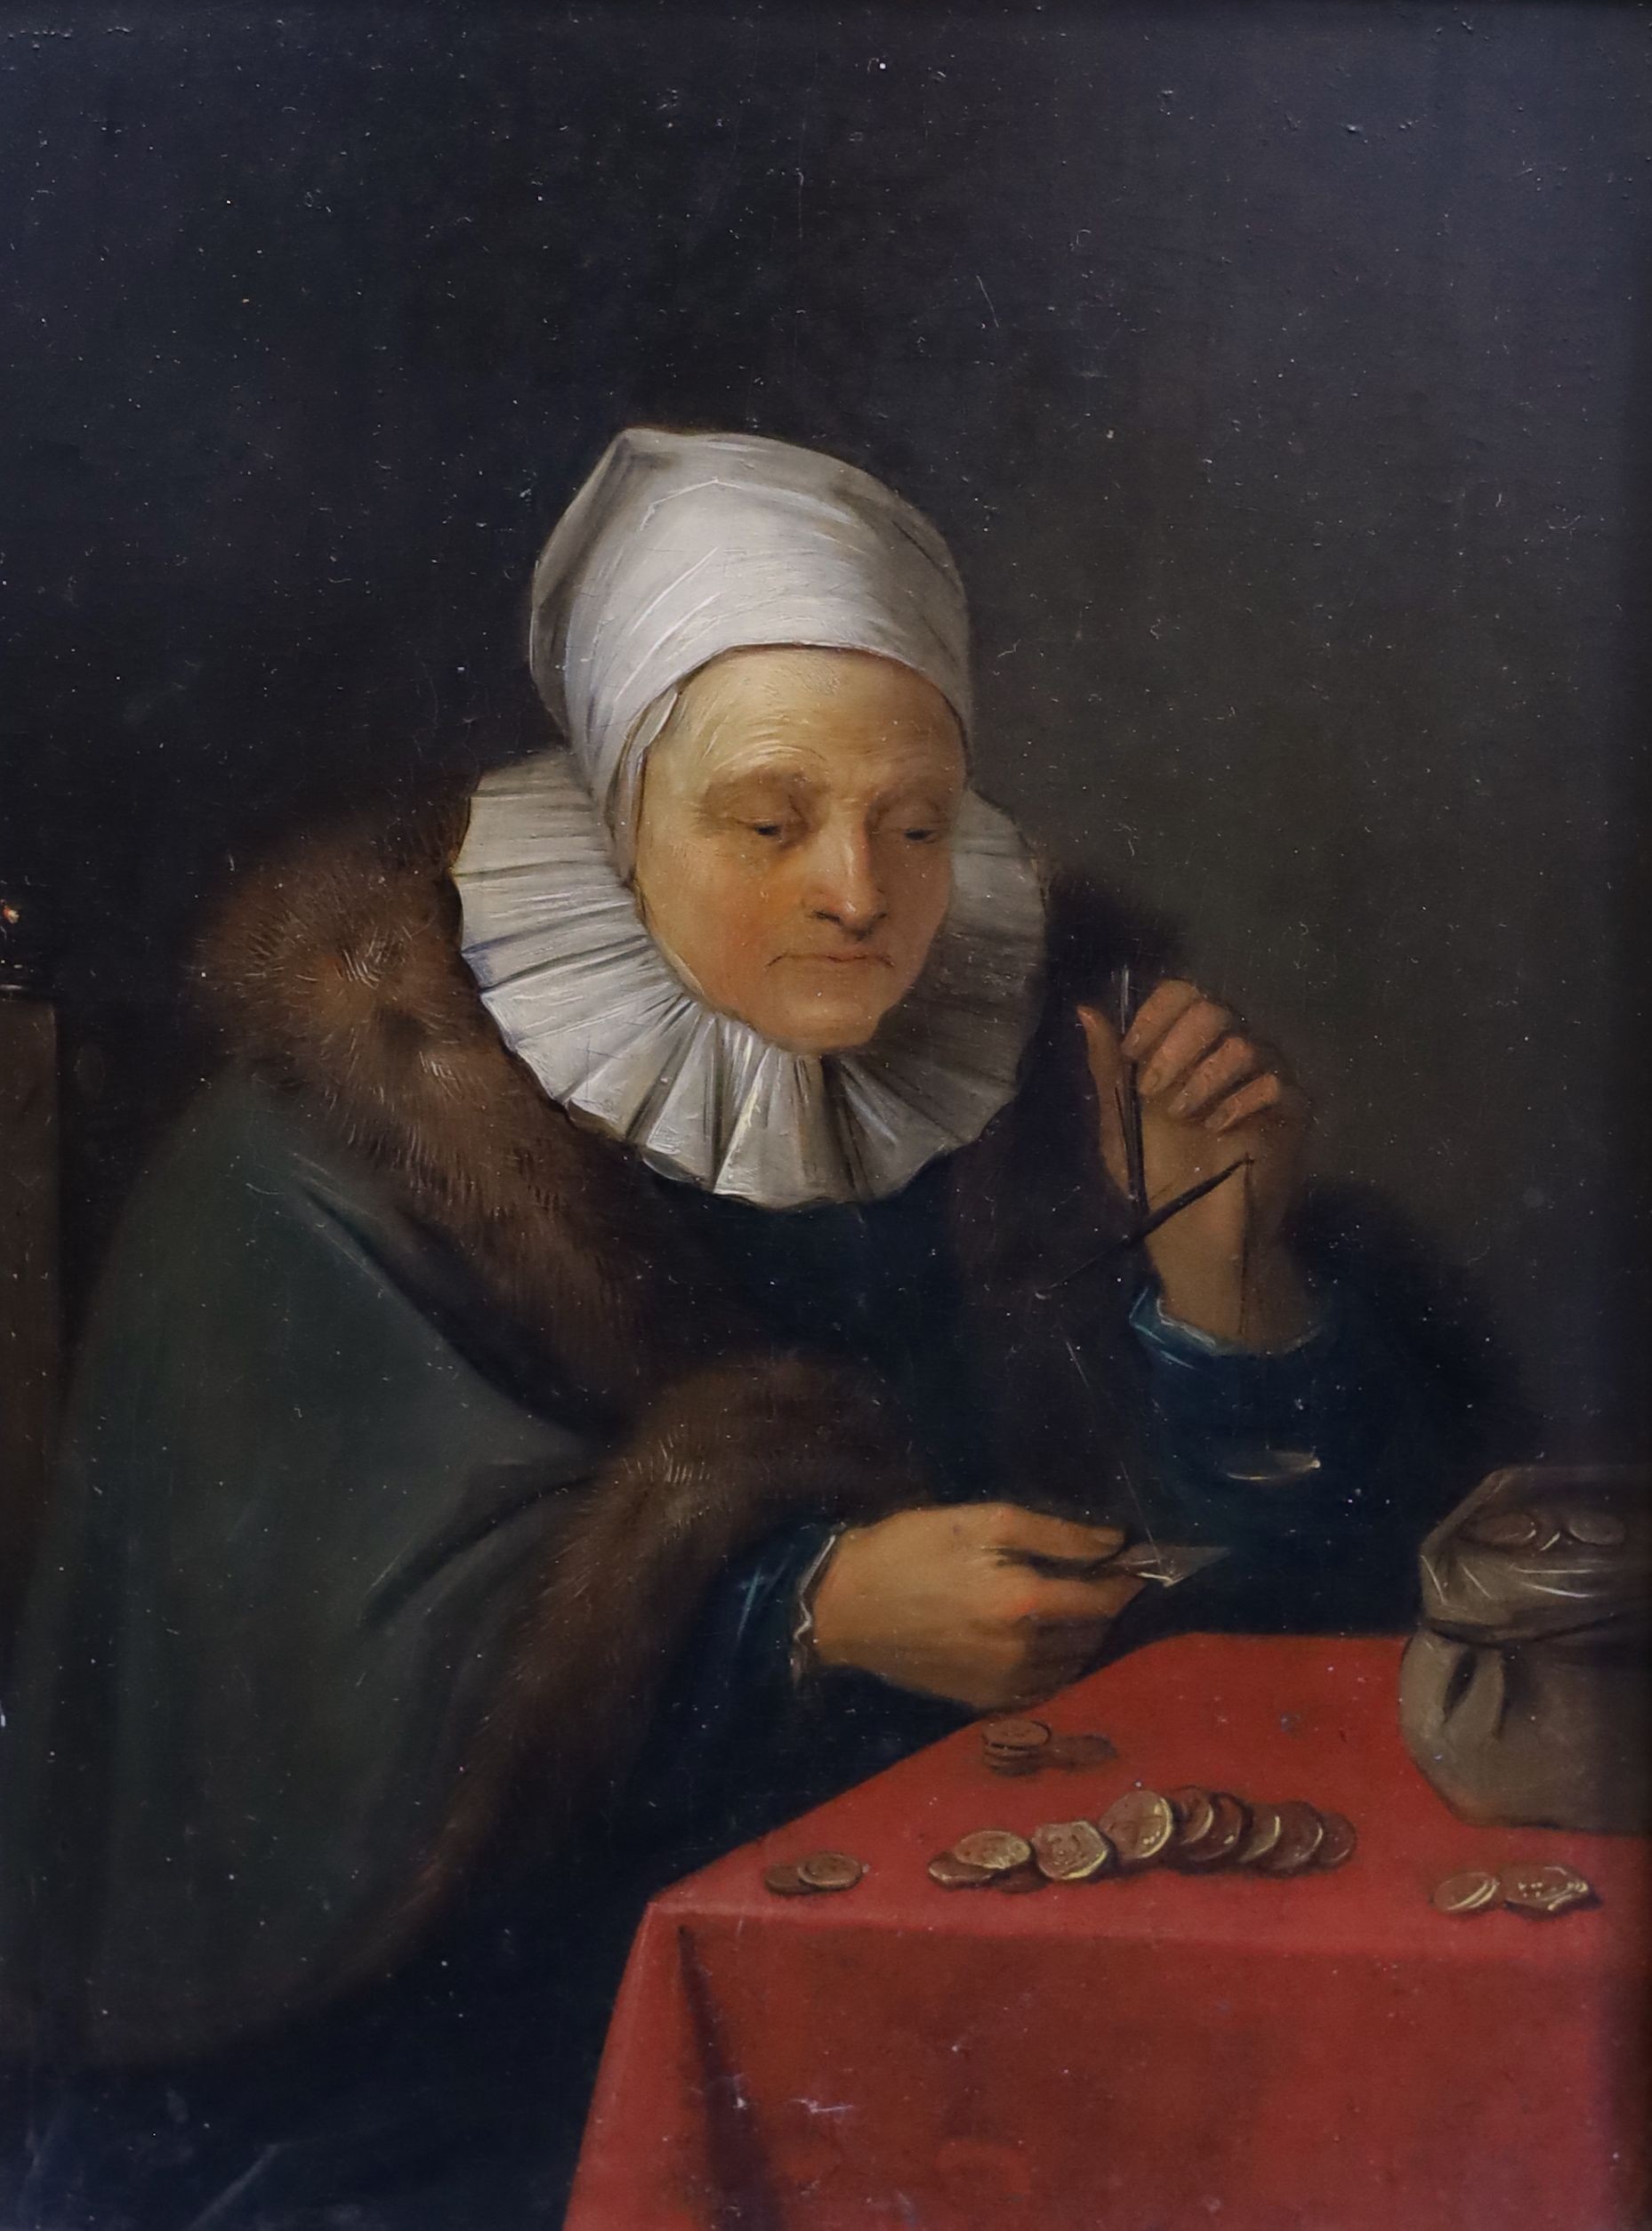 18th century Flemish School, Woman seated at a table counting money, oil on wooden panel, 18.5 x 14cm